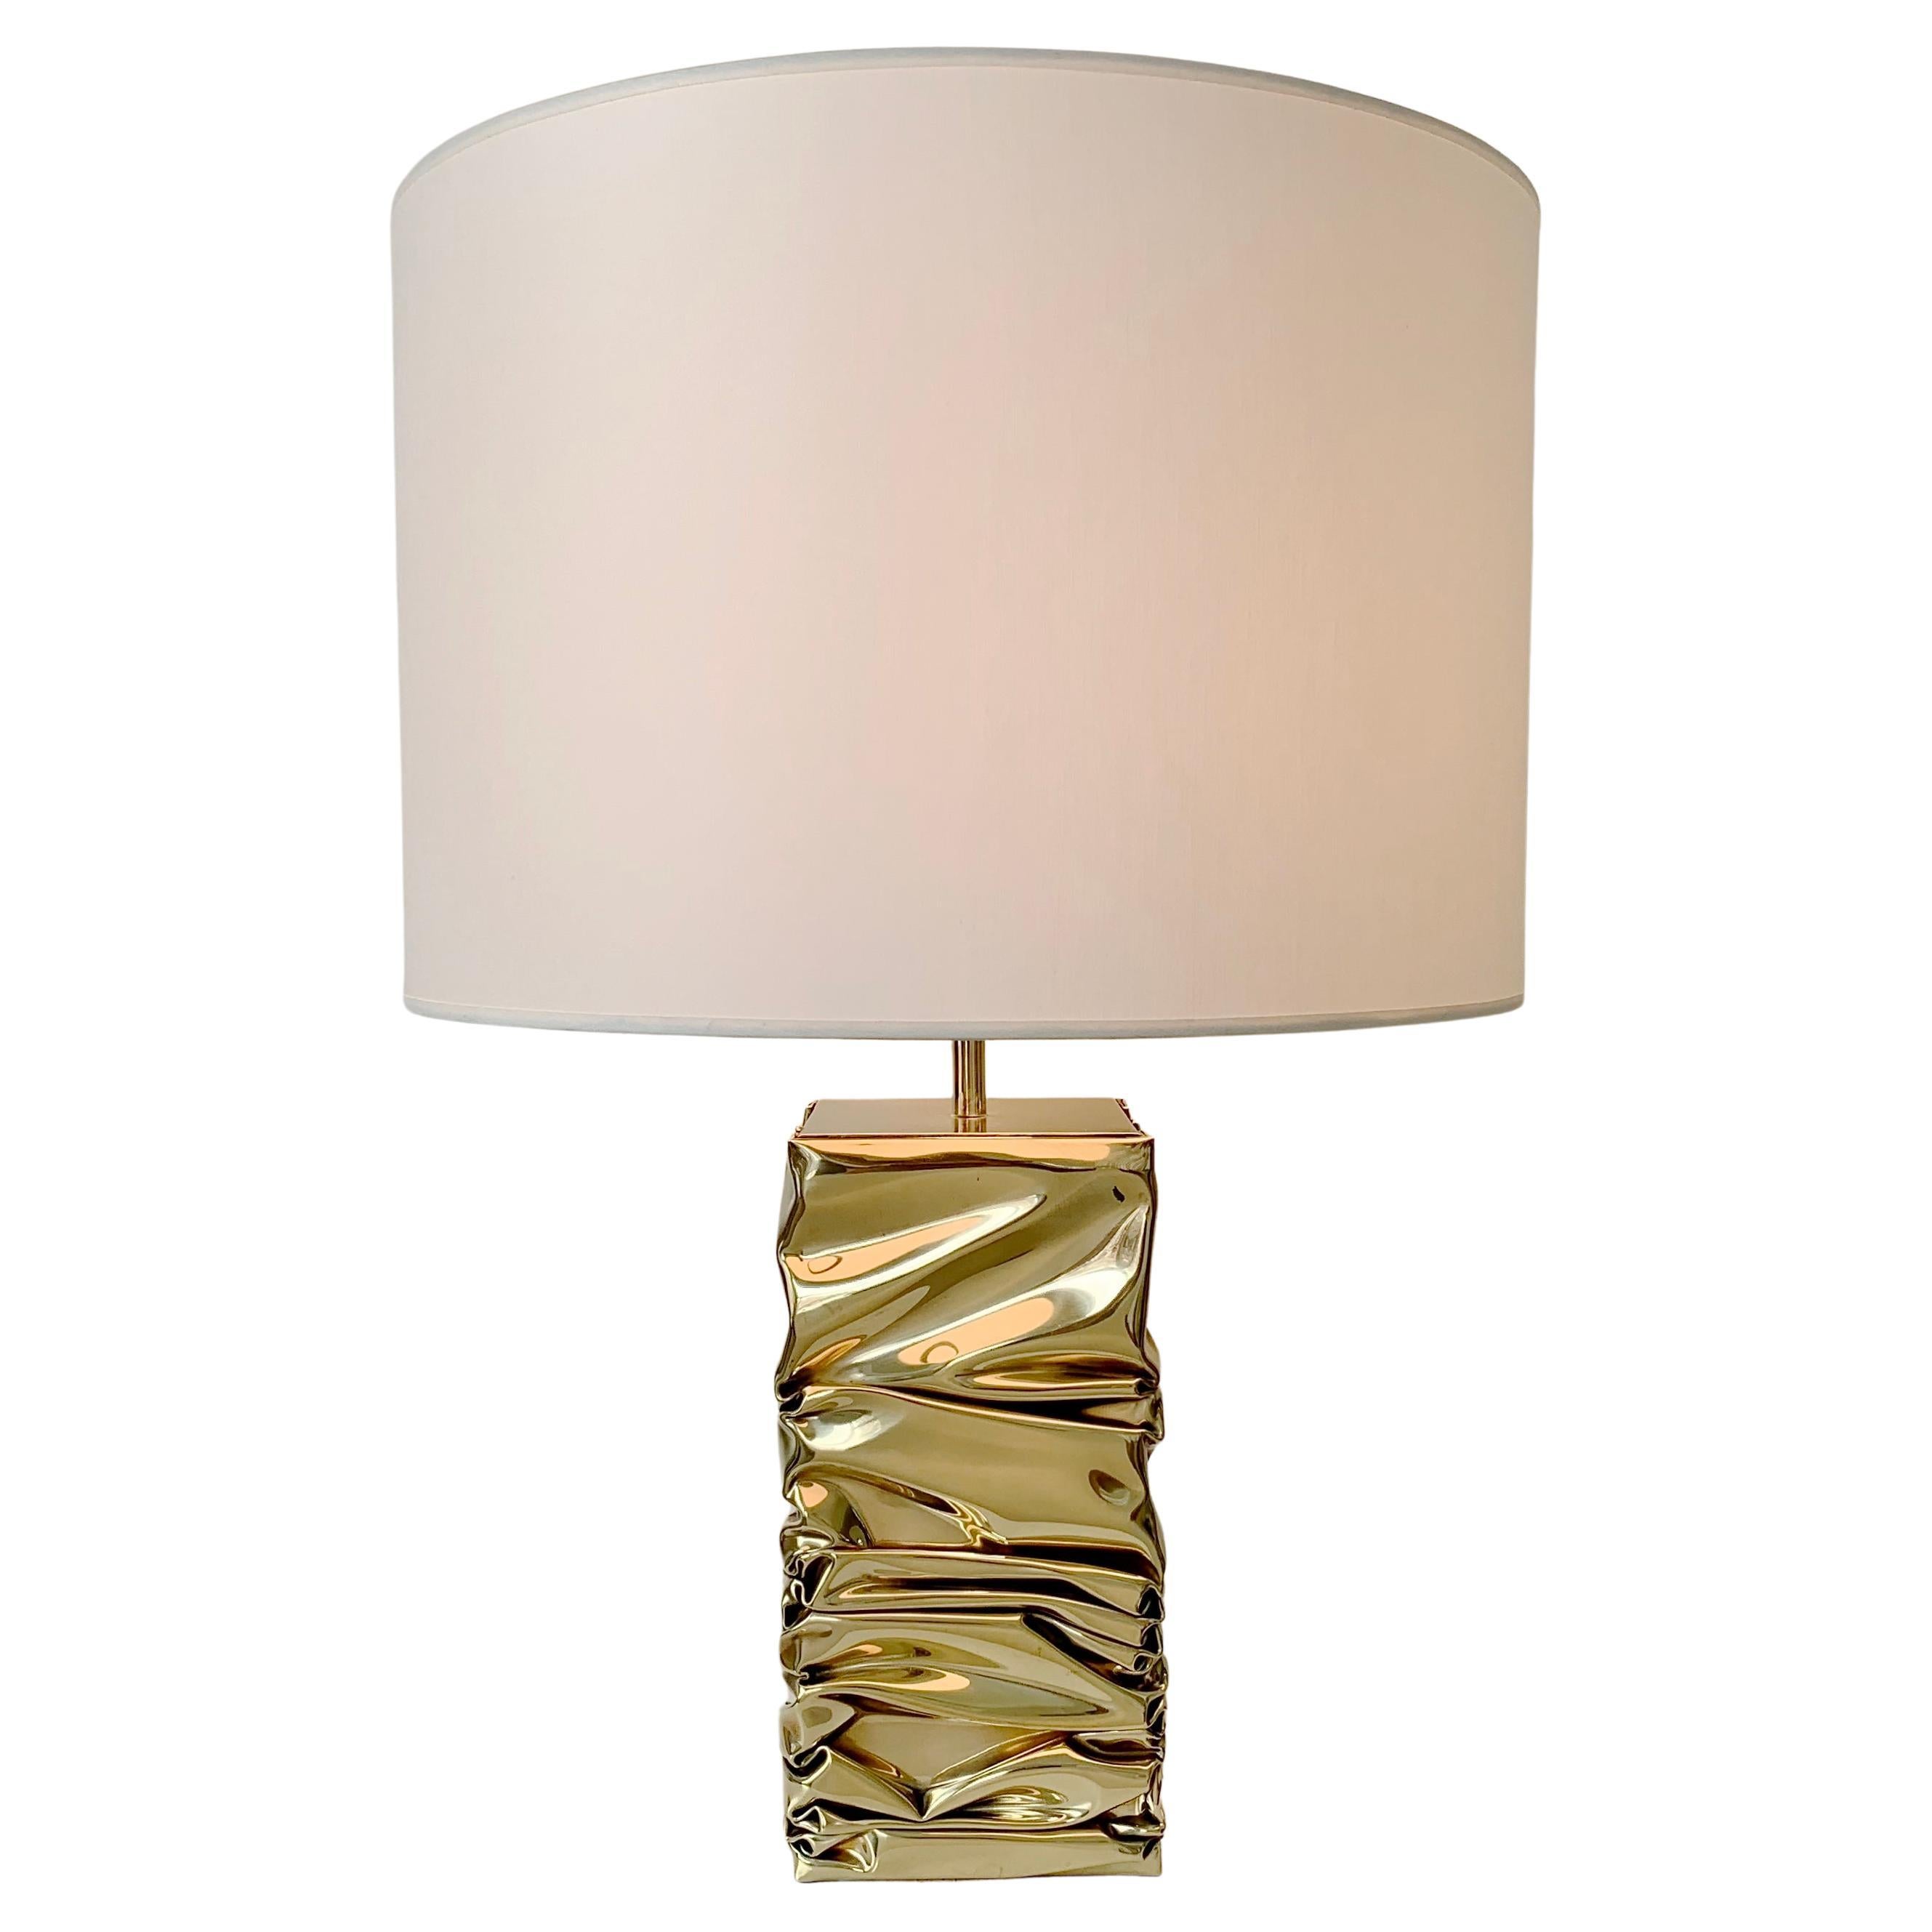 Very chic Jacques Moniquet table lamp, Cheret edition, circa 1975, France.
Folded brass and new fabric shade.
Signed on the back: Moniquet Edition Cheret Paris
Each piece produced by Moniquet is unique.
One E27 bulb.
Rewired for EU and USA